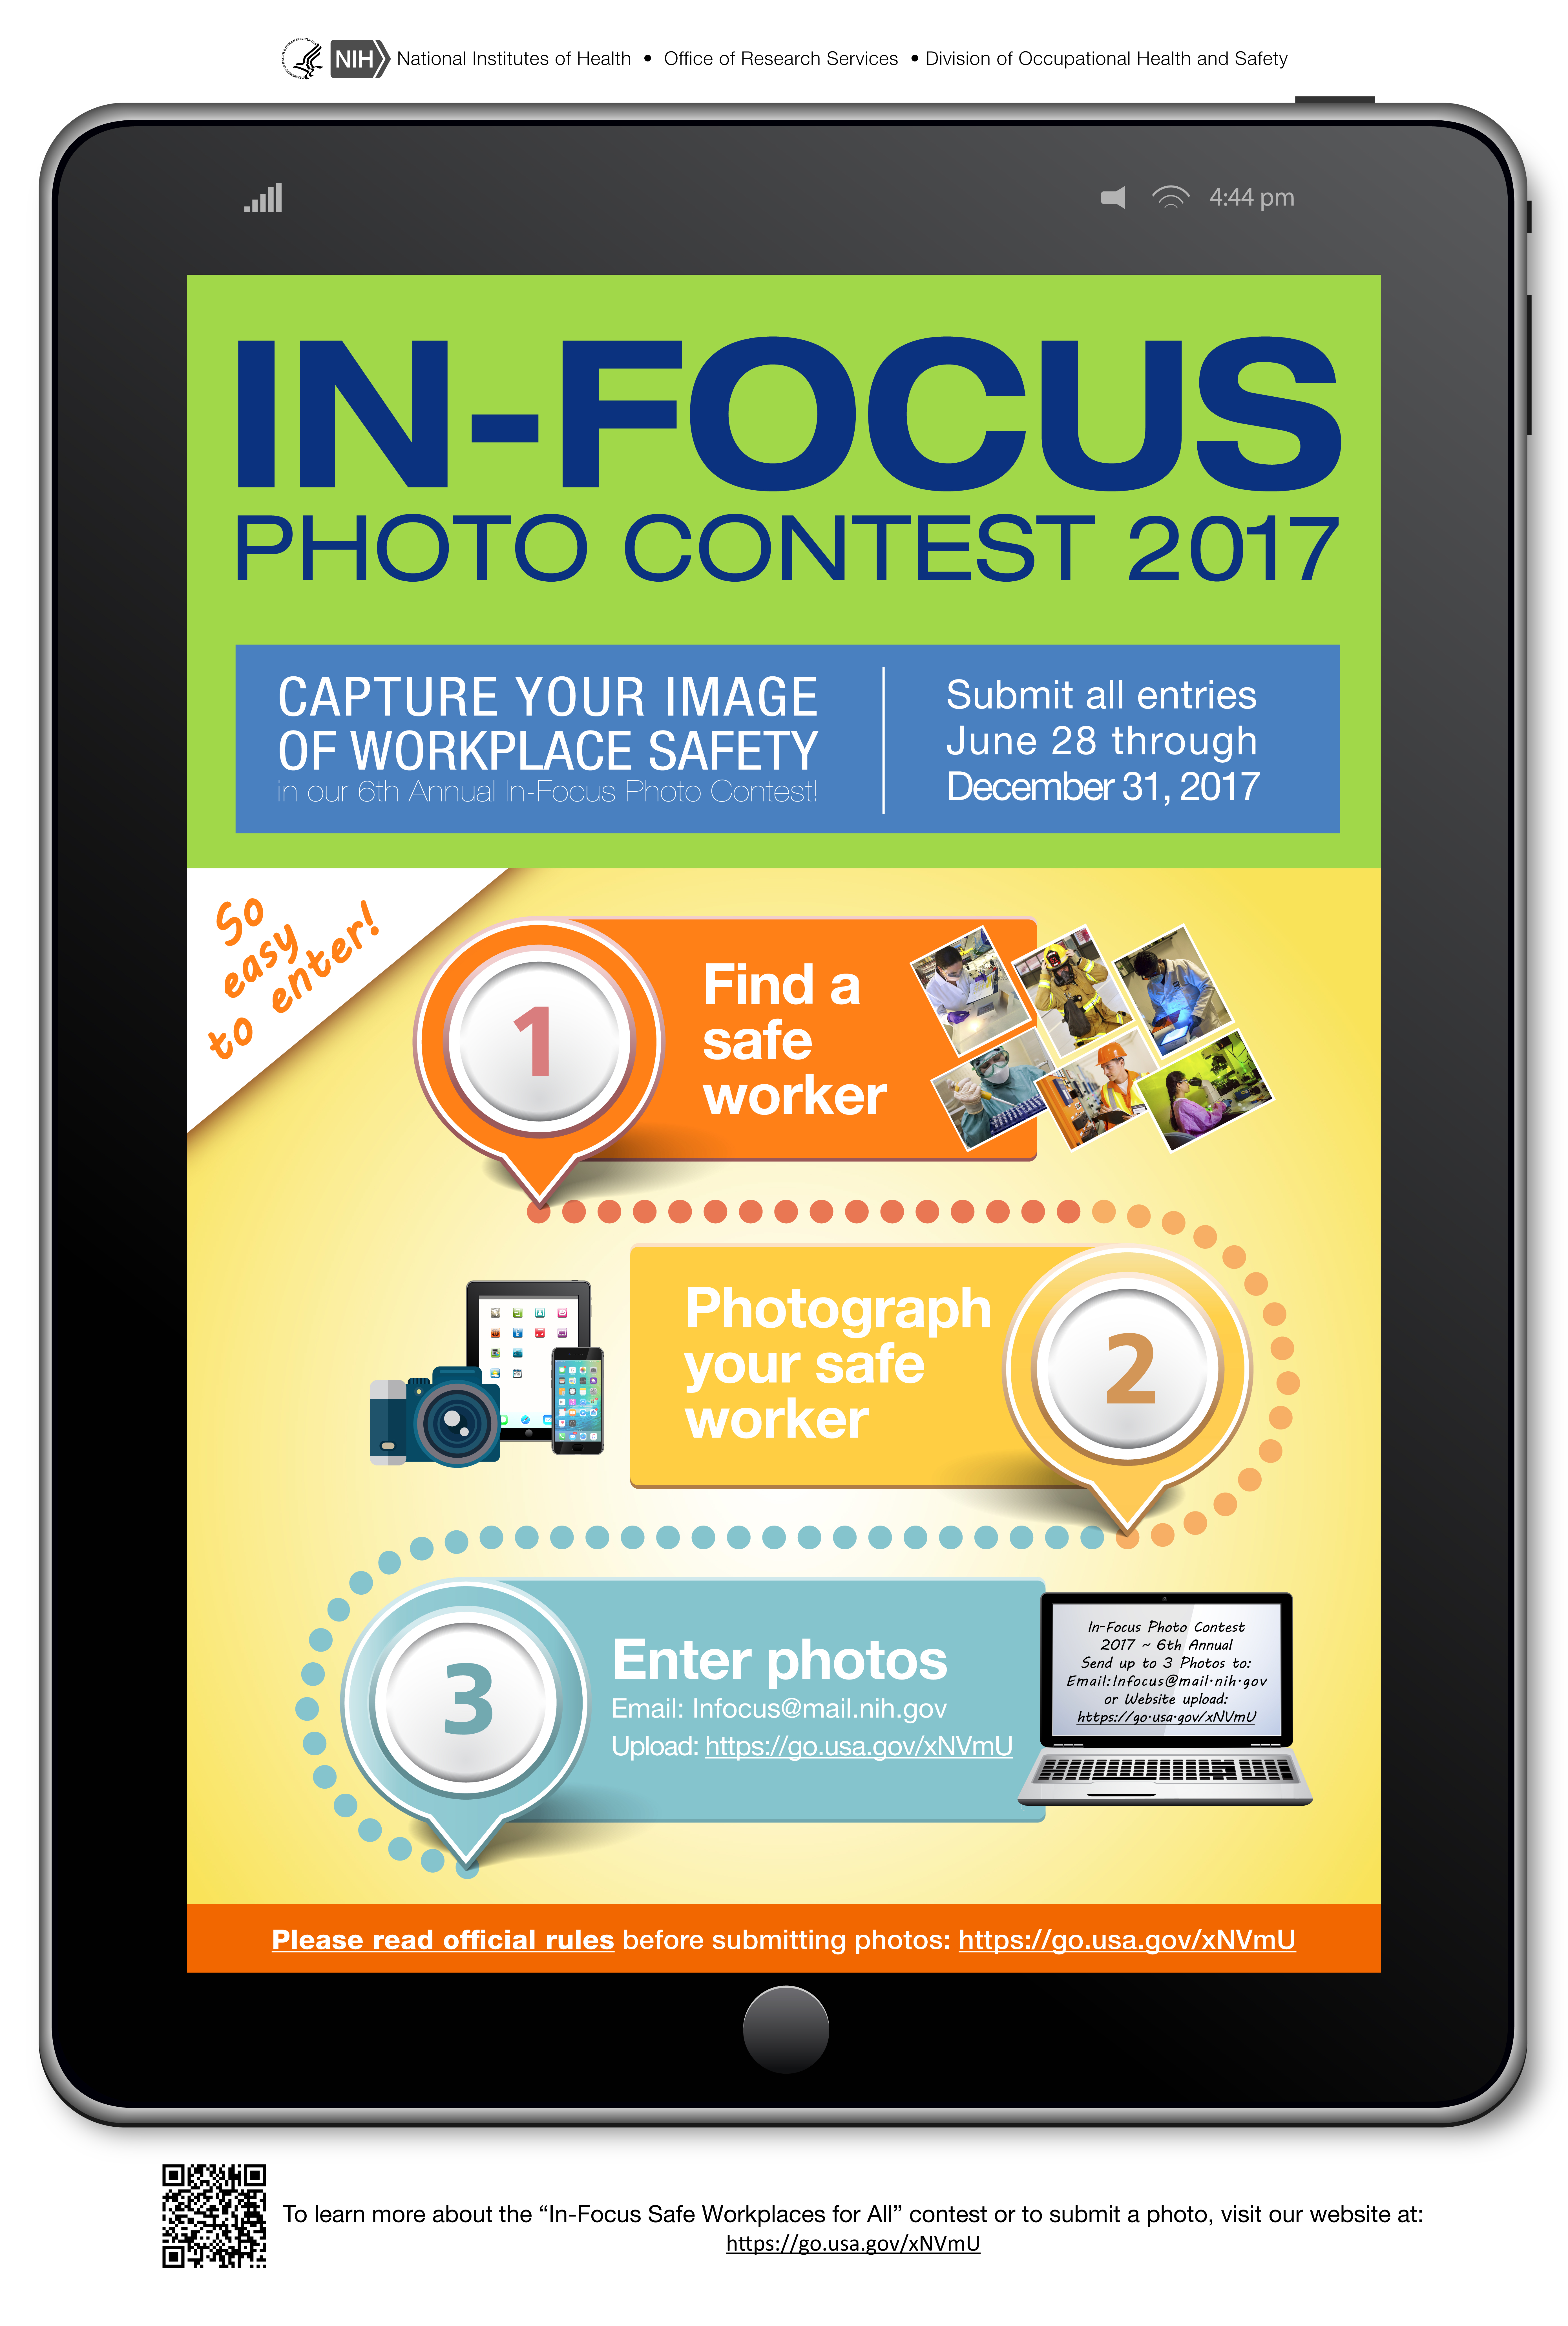 Decorative picture of In Focus Flyer that promotes finding a safe worker and photographing them for the contest.